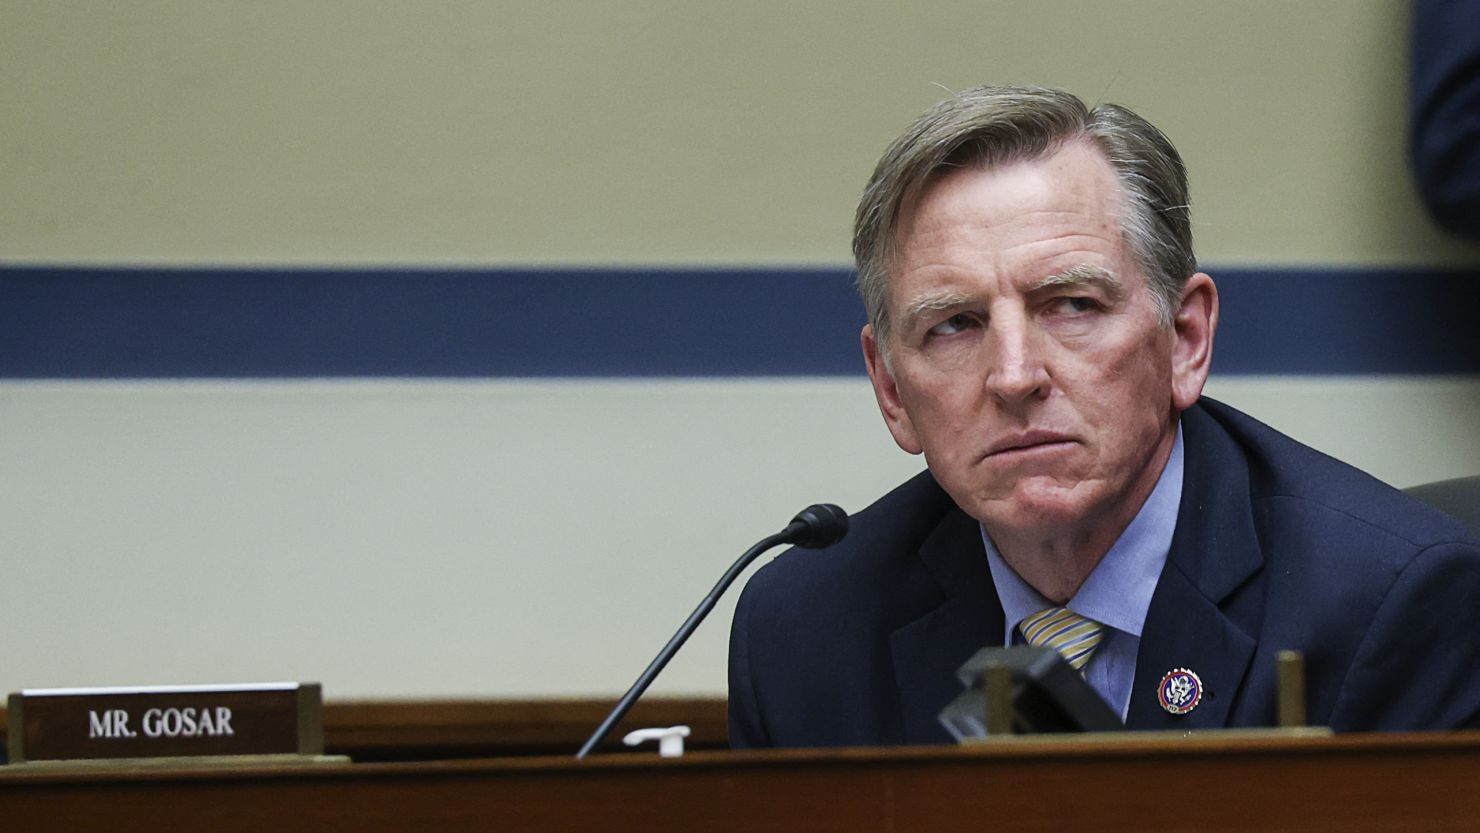 Rep. Paul Gosar (R-AZ) attends a House Oversight and Reform Committee hearing titled The Capitol Insurrection: Unexplained Delays and Unanswered Questions, regarding the January 6 attack on the US Capitol, in Washington, DC, on May 12, 2021. (Photo by JONATHAN ERNST / POOL / AFP) (Photo by JONATHAN ERNST/POOL/AFP via Getty Images)